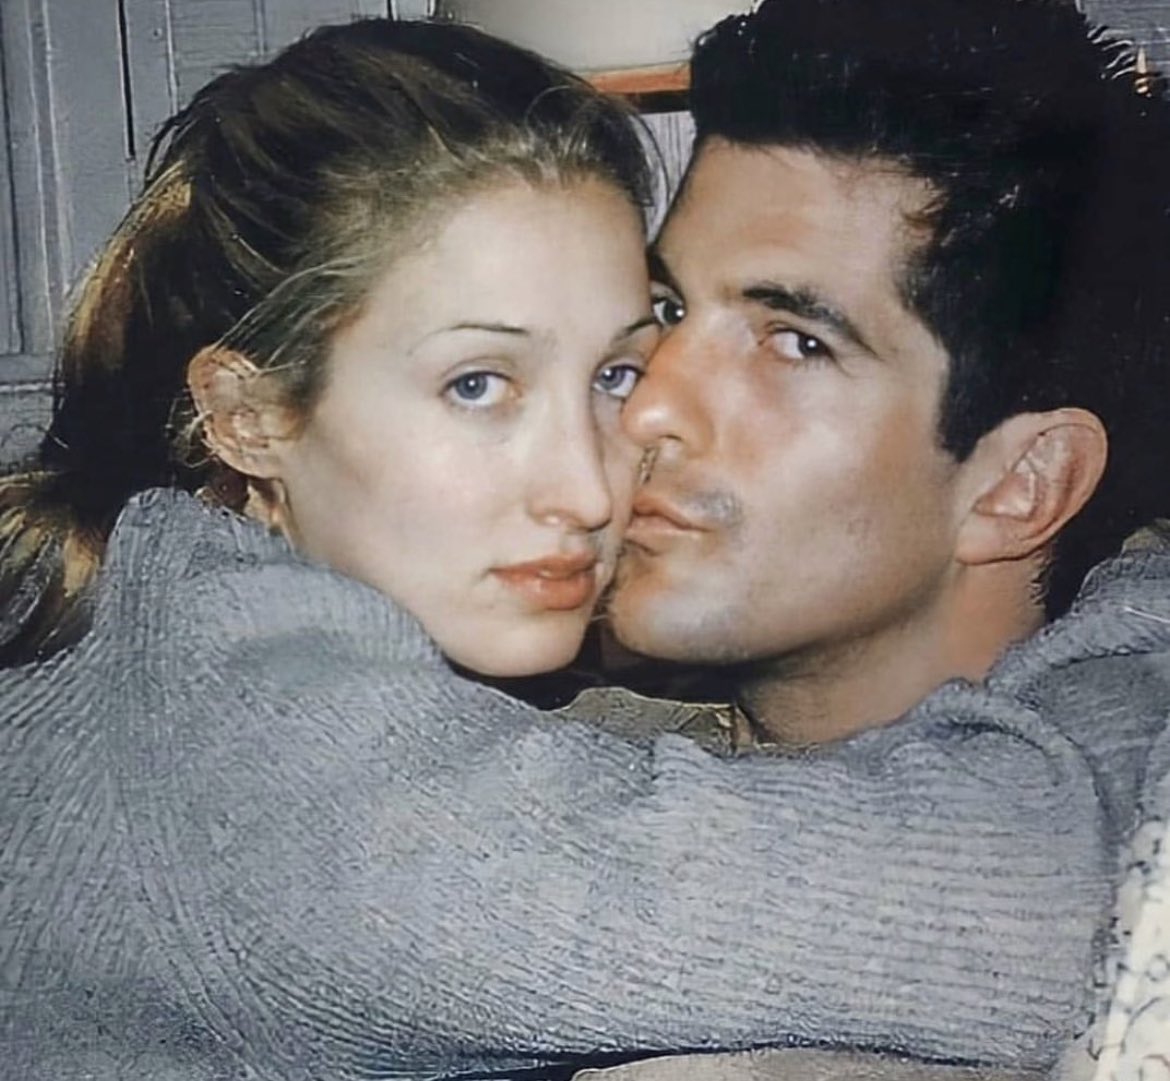 It's been 24 years today that John F. Kennedy Jr., his wife, Carolyn Bessette Kennedy, and her sister, Lauren Bessette, took off on a humid, windy, and hazy night in a single-engine Piper 32 Saratoga aircraft from Caldwell, N.J., en route to the Martha's Vineyard Airport, but…